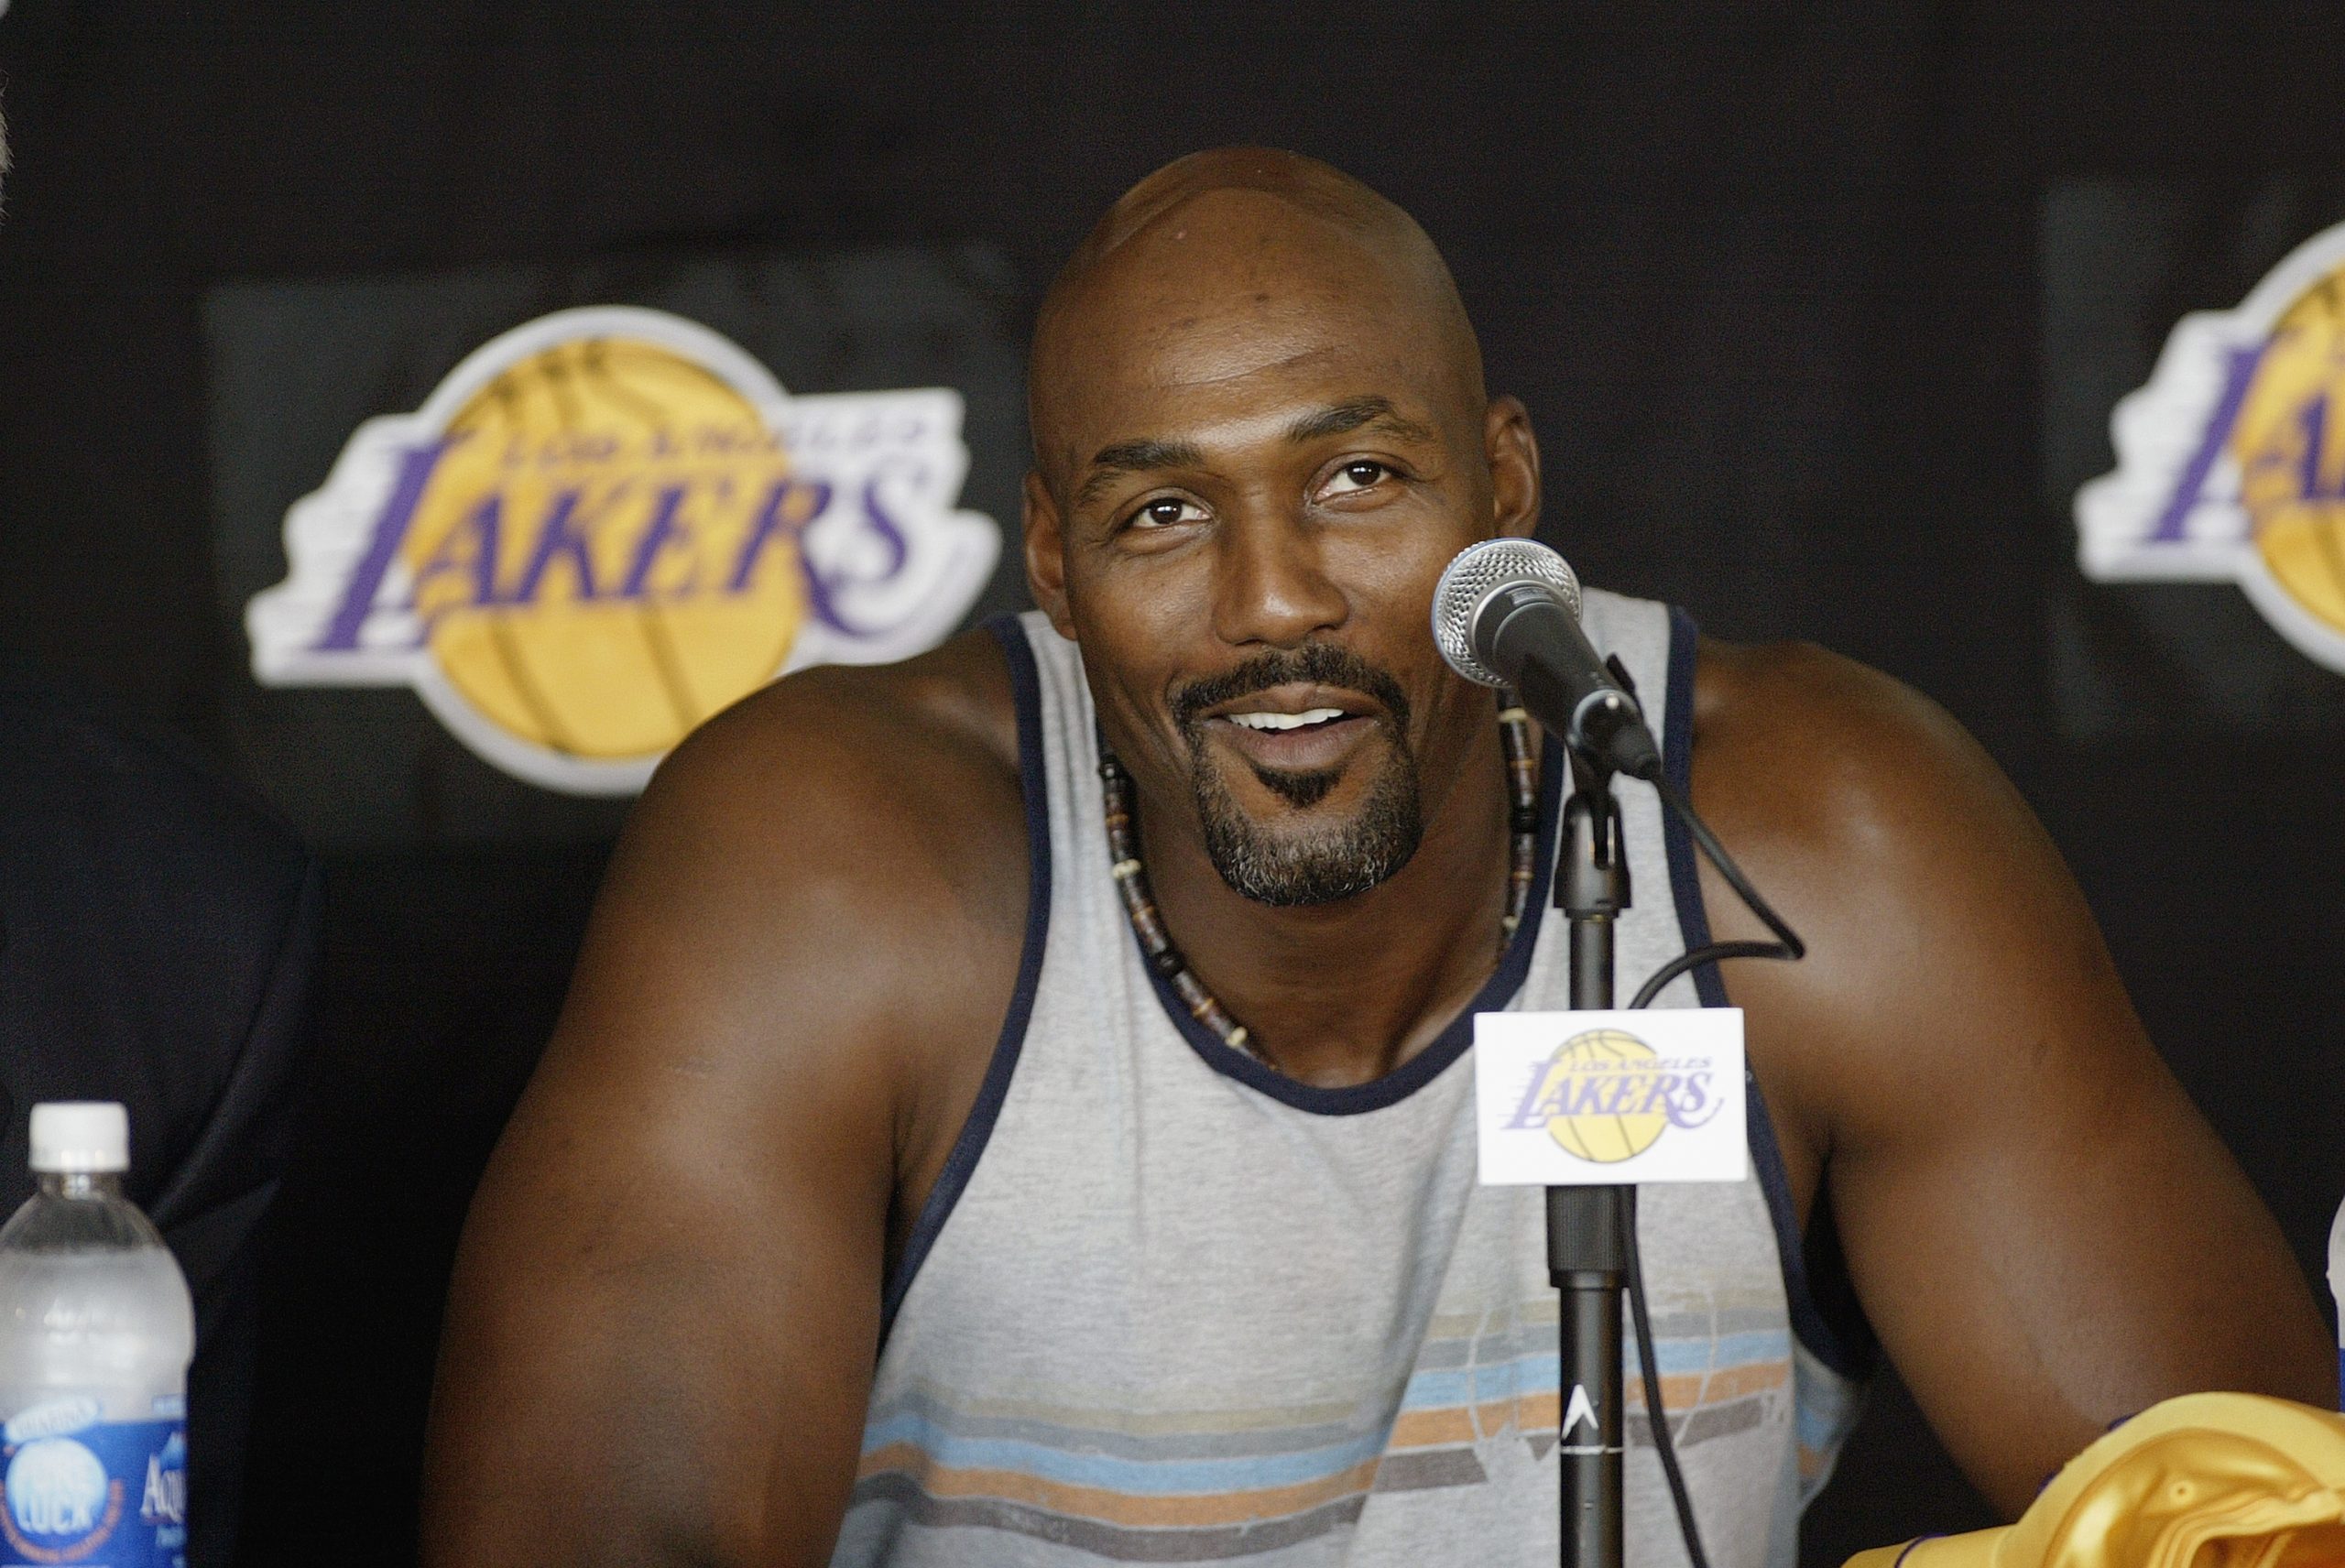 Karl Malone Realized He Needed the Los Angeles Lakers Much More Than He  Thought Back in 1983